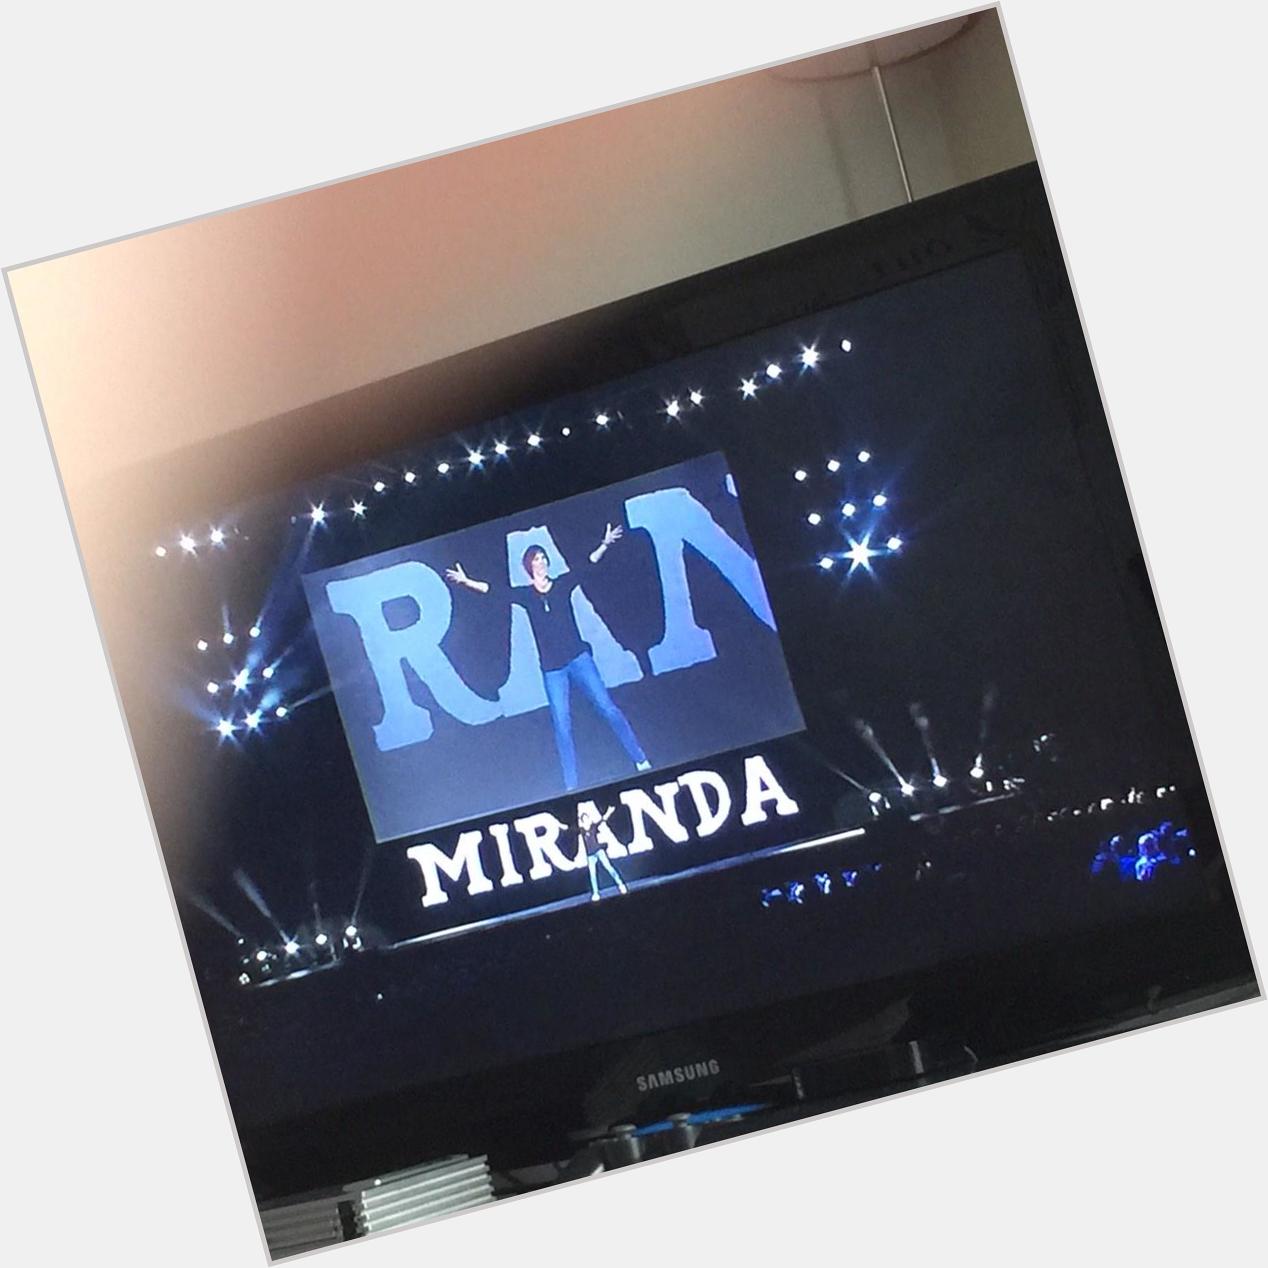 Watching Miranda hart what I call live show as its her birthday :) happy b day chick 